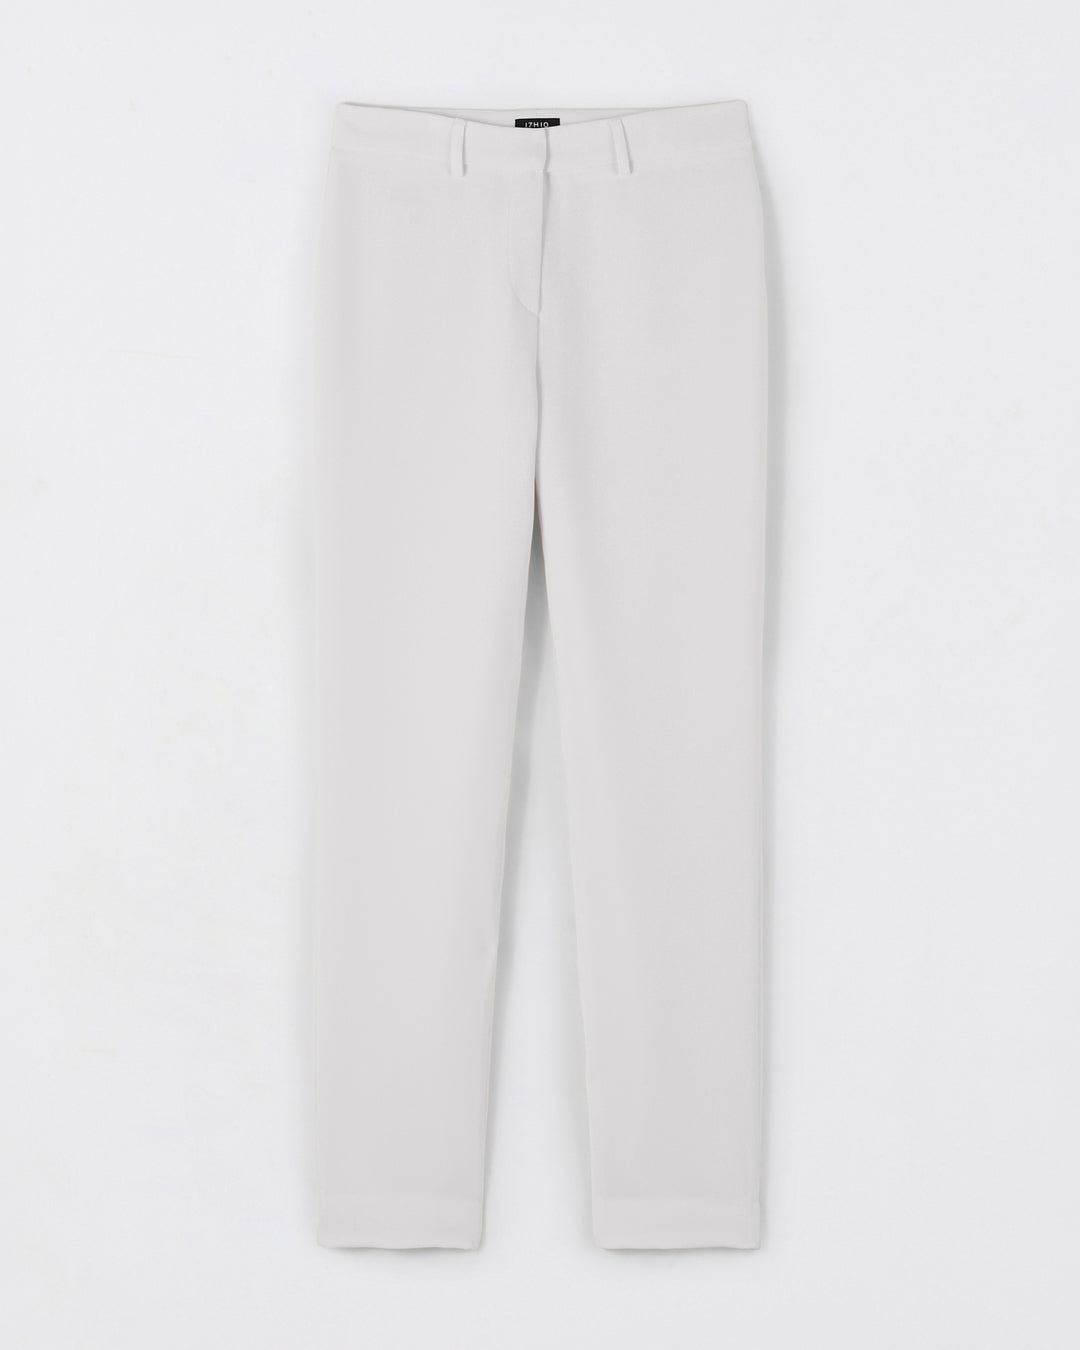 Trousers-white-cigarette-cut-waist-mid-rise-faux-pockets-cavalier-before-pockets-peeled-behind-passing-belt-zip-closure-hook-button-covered-tone-on-tone-Drap-laine-italian-luxurious-17H10-tailors-for-women-paris-